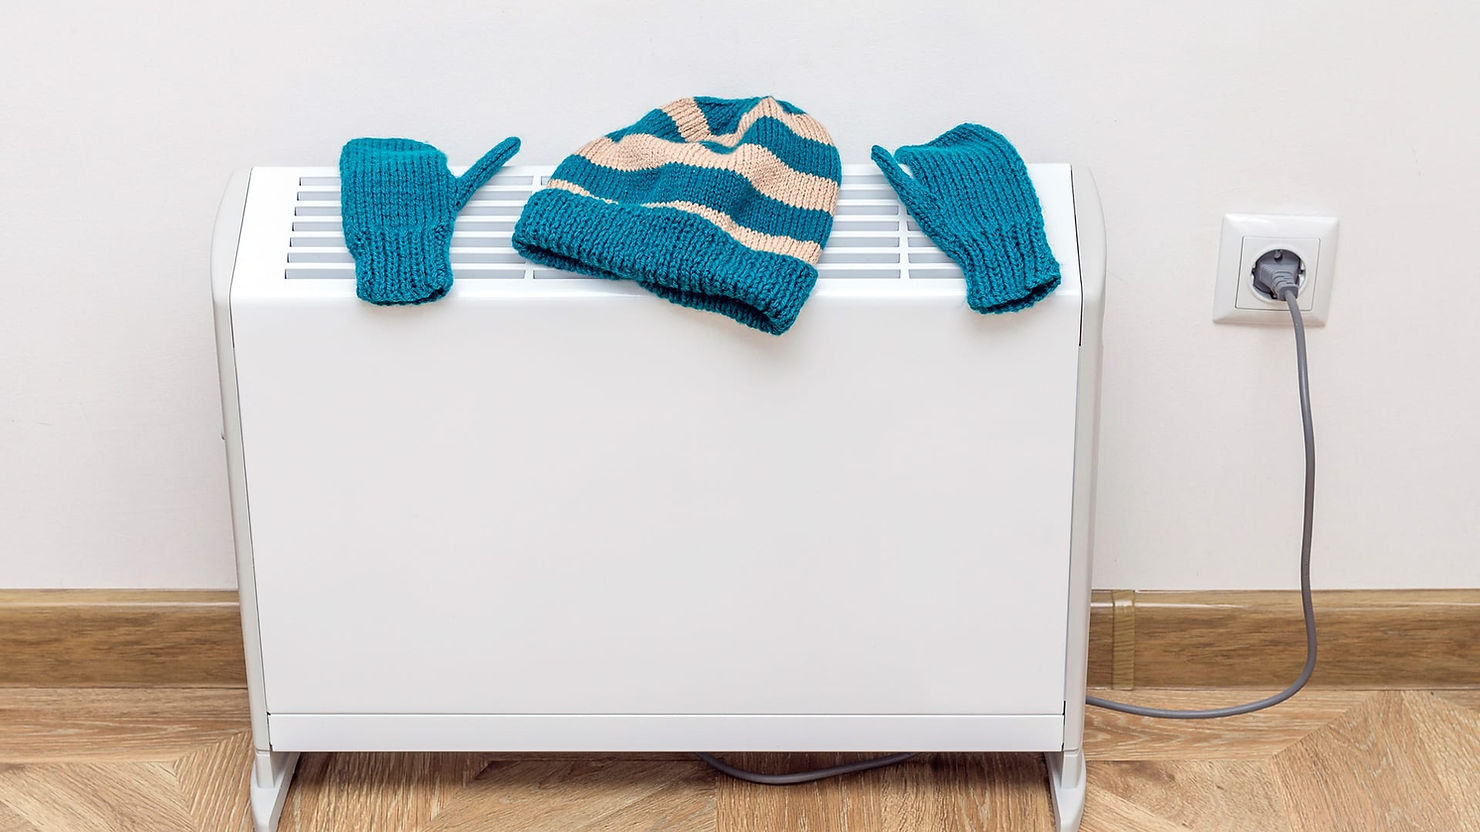 Woolly hat and gloves drying on a radiator